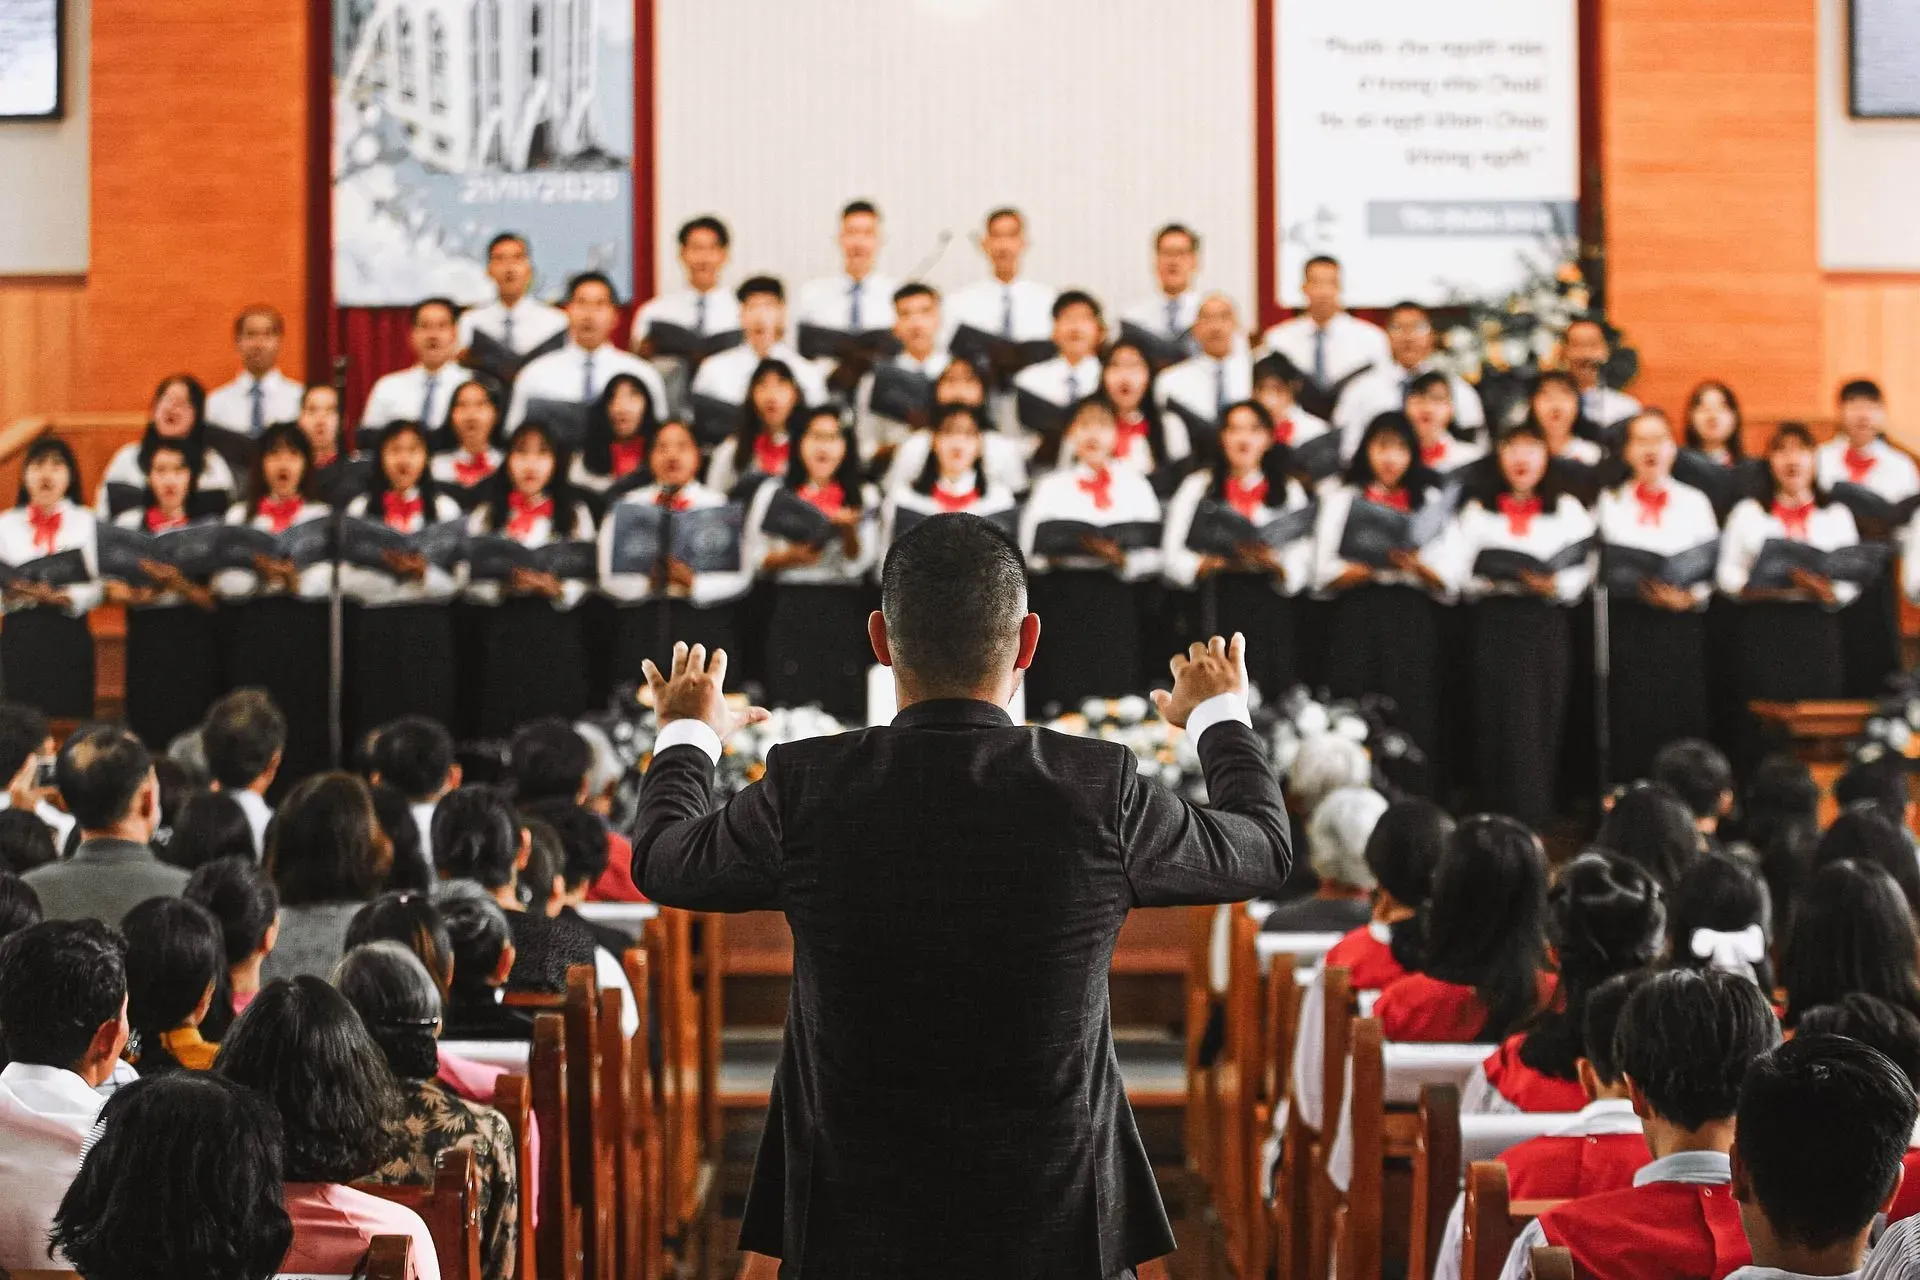 Learn about Gospel choirs to know more about sacred songs.